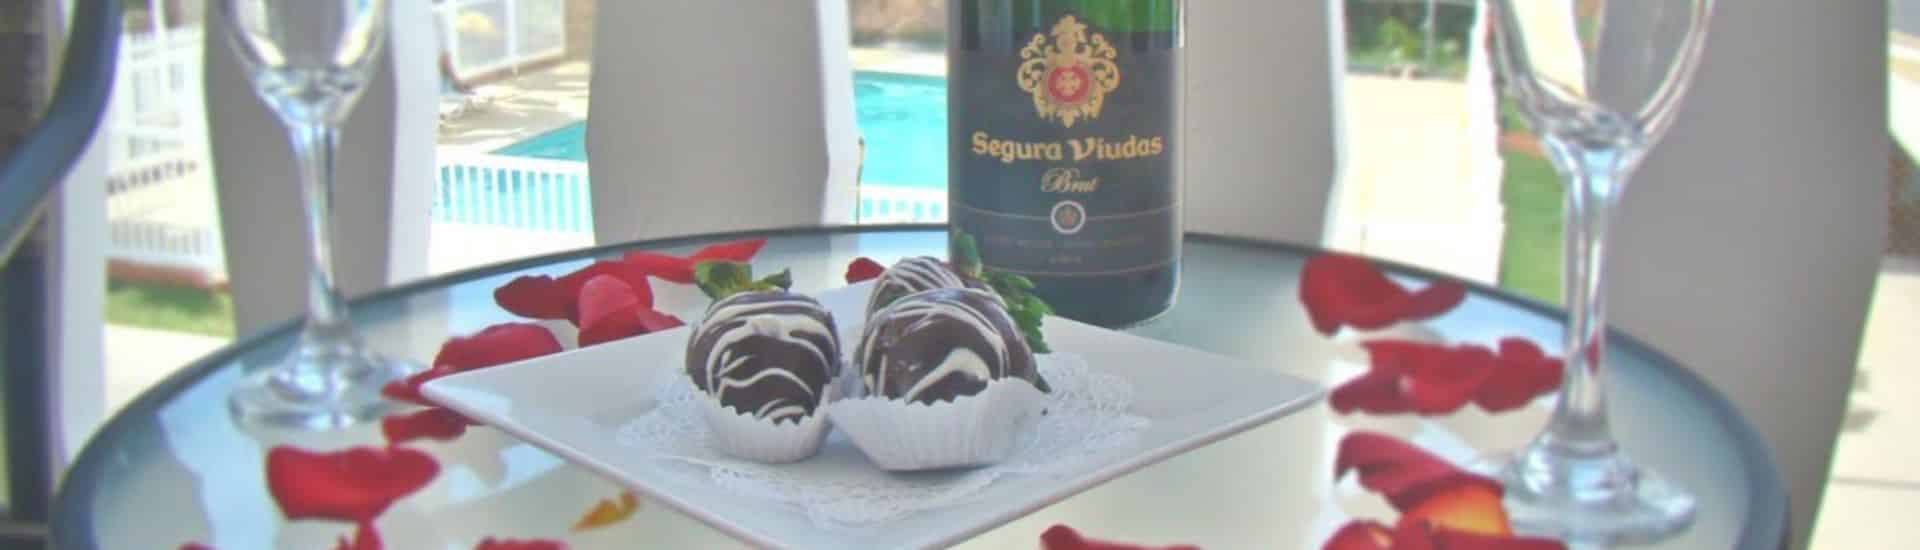 Close up view of chocolate covered strawberries on a square white plate, Champagne bottle, Champagne glasses, and red rose petals on a glass table